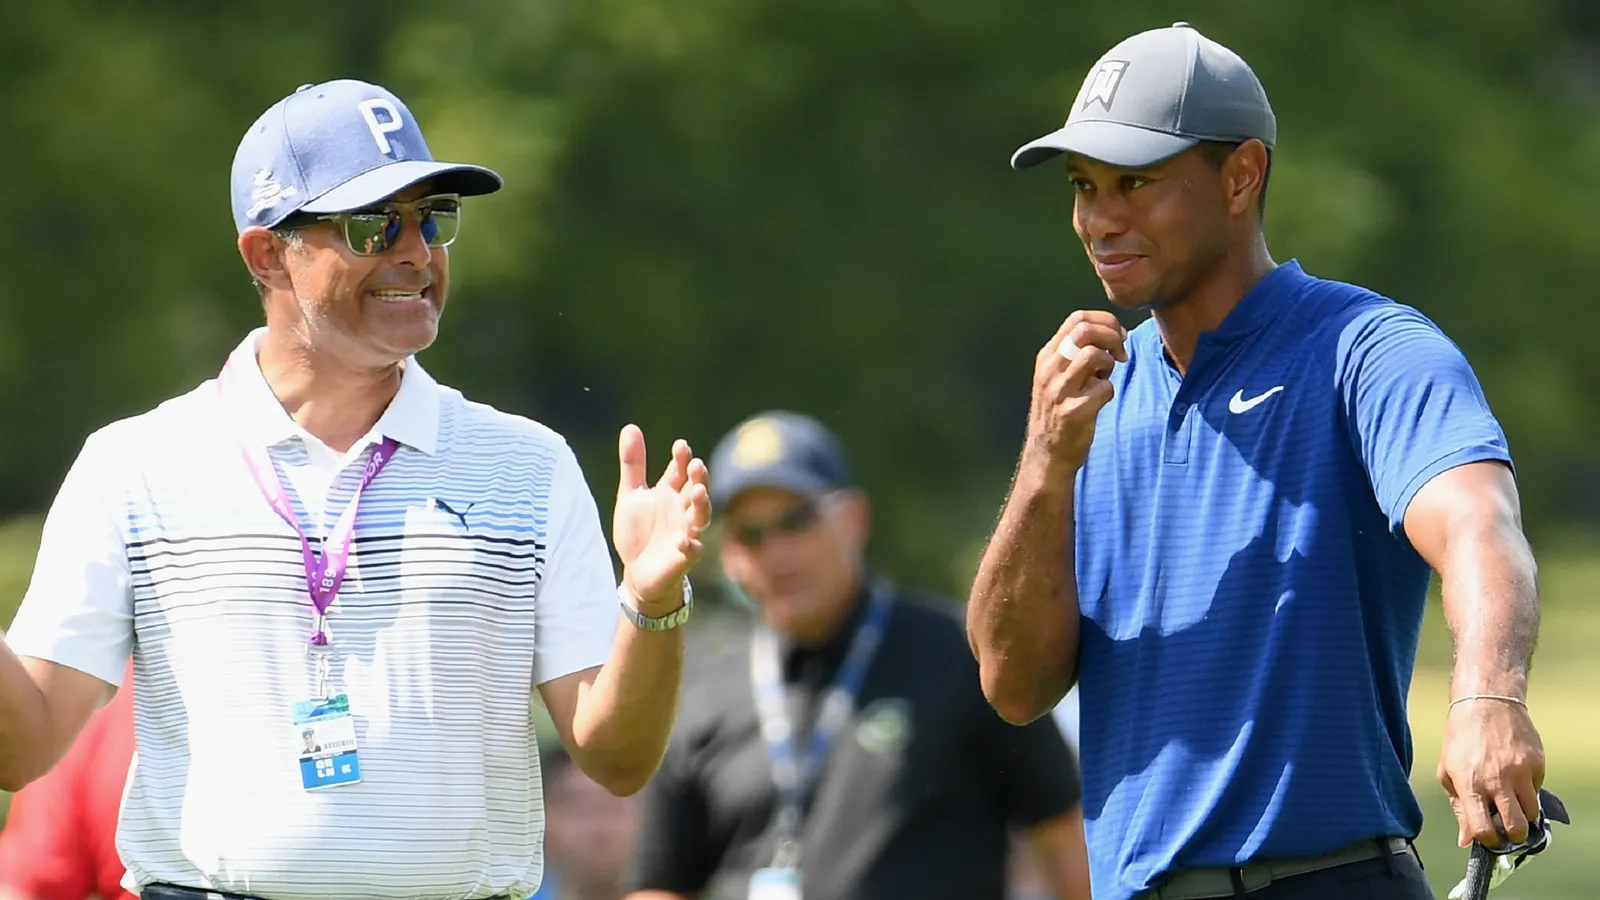 Claude Harmon takes aim at Tiger Woods as he defends Brooks Koepka's LIV move - cover